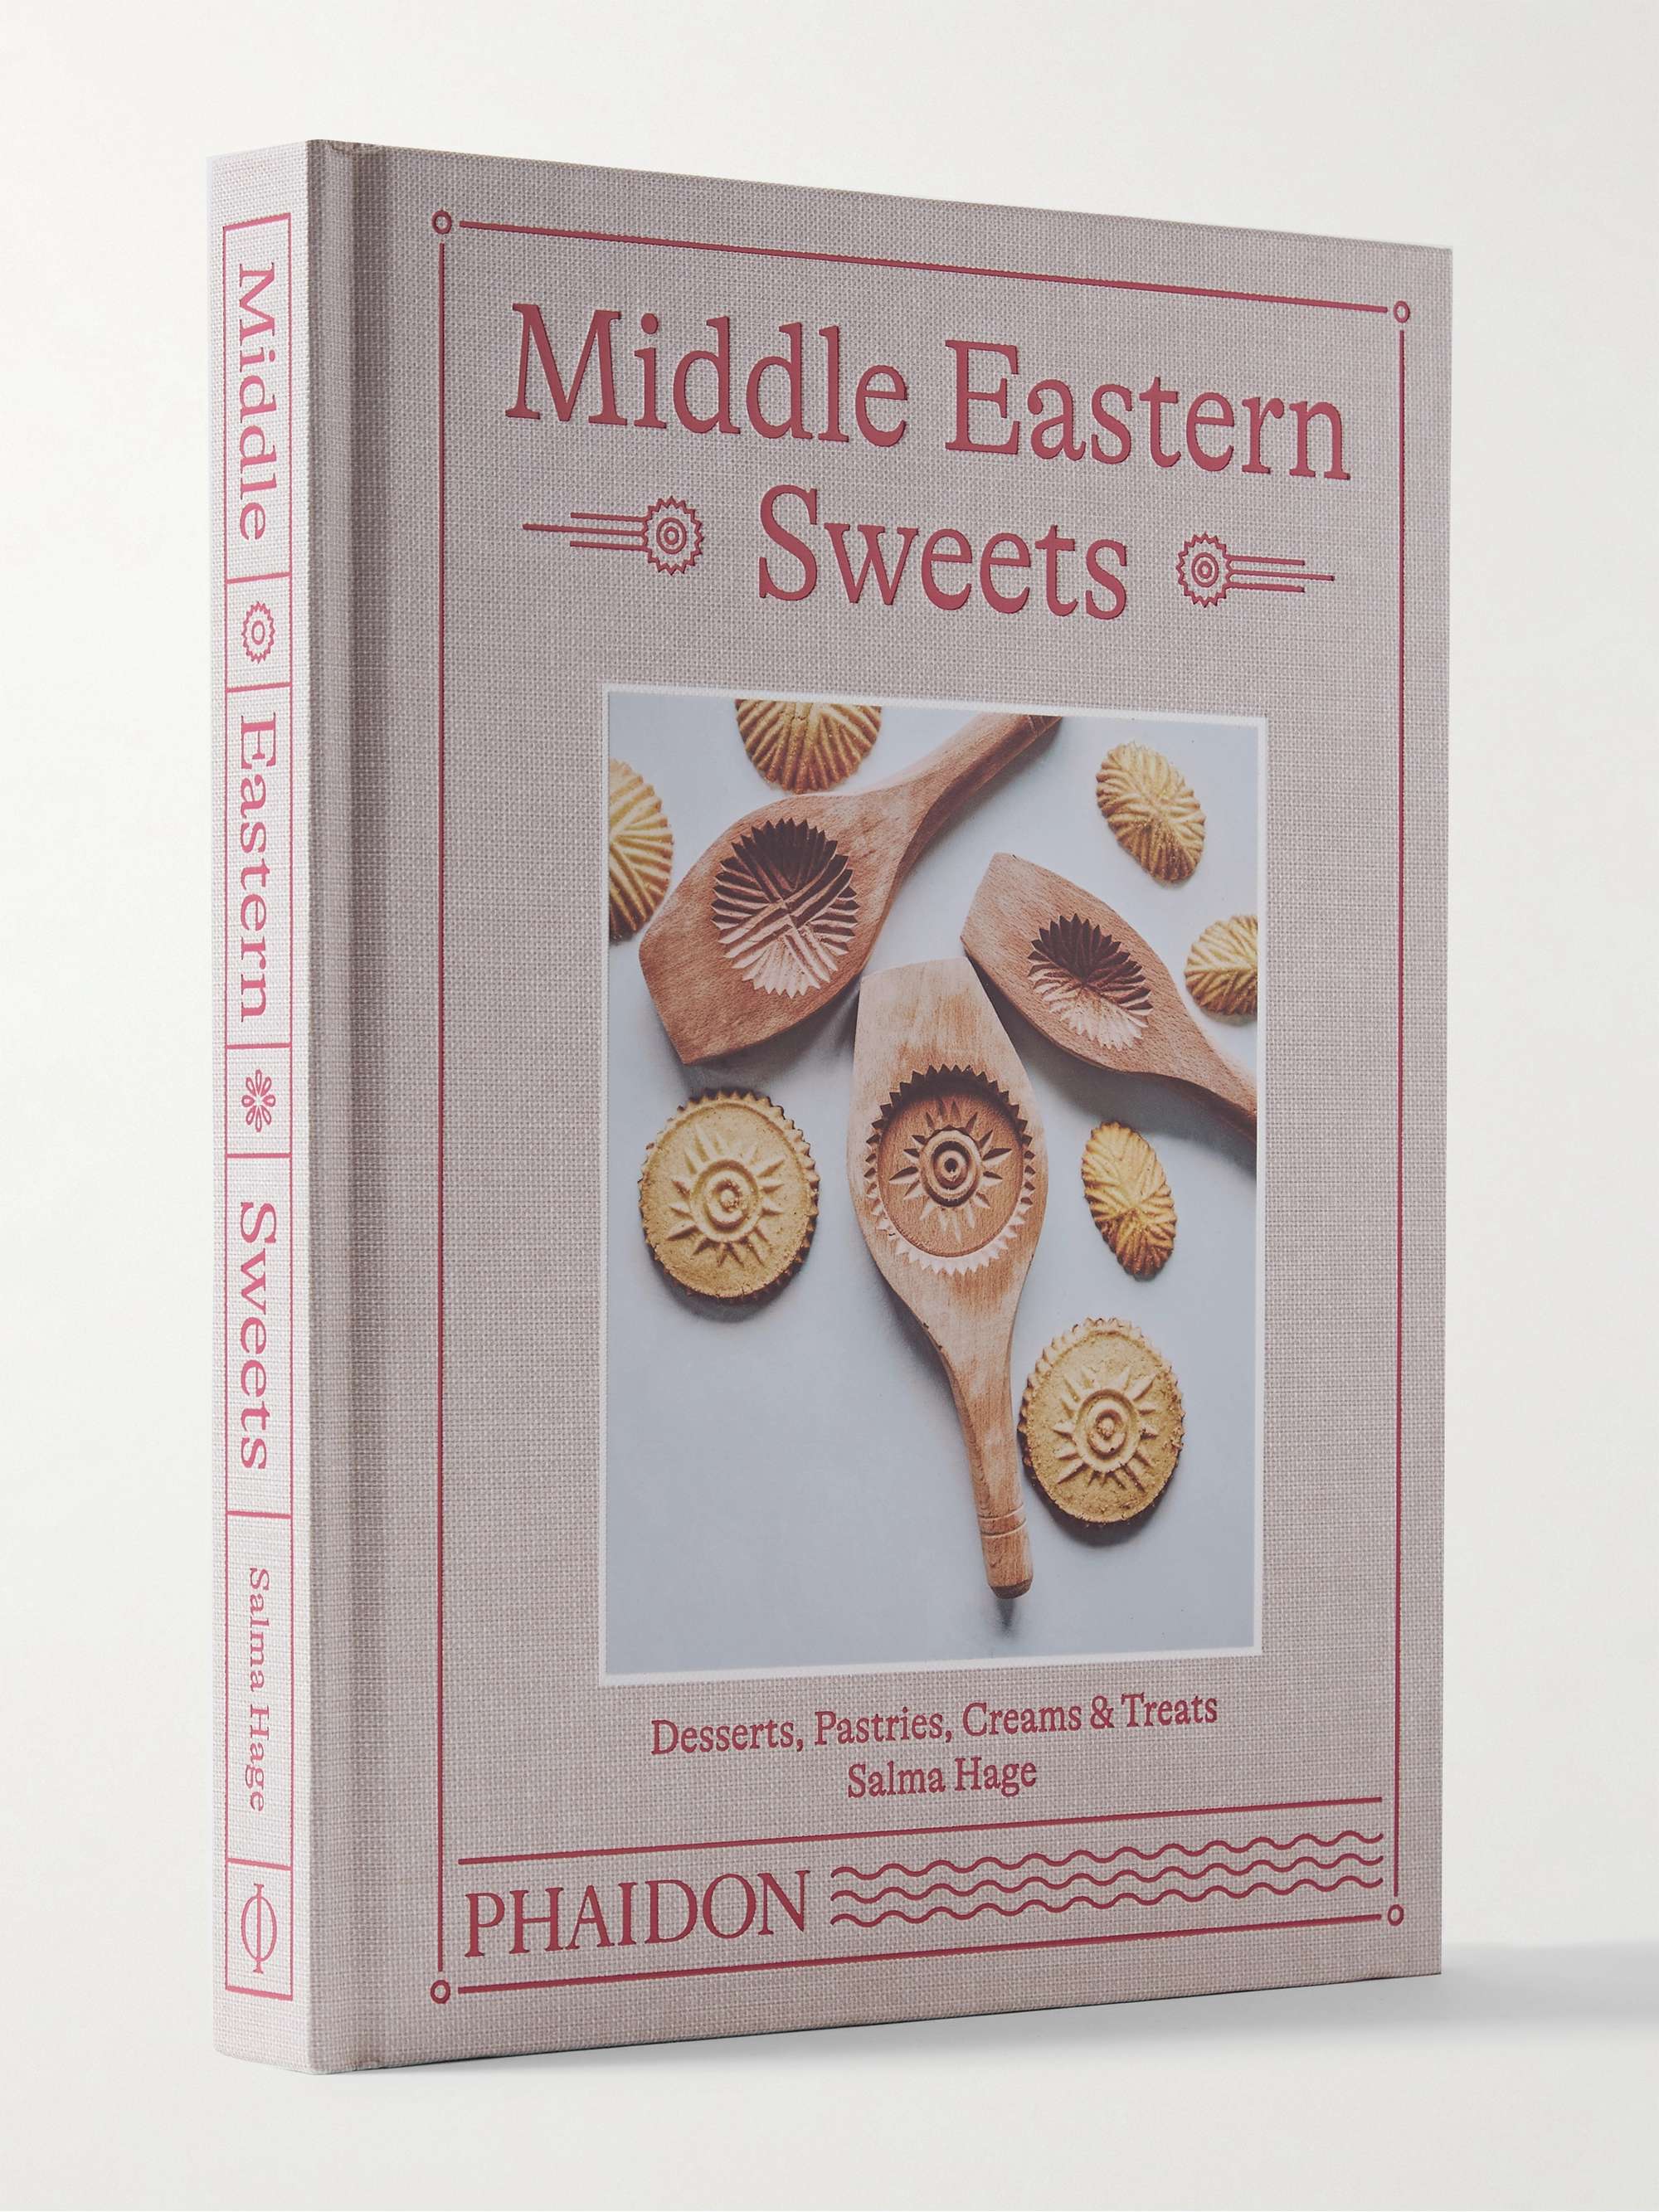 PHAIDON Middle Eastern Sweets: Desserts, Pastries, Creams & Treats Hardcover Book